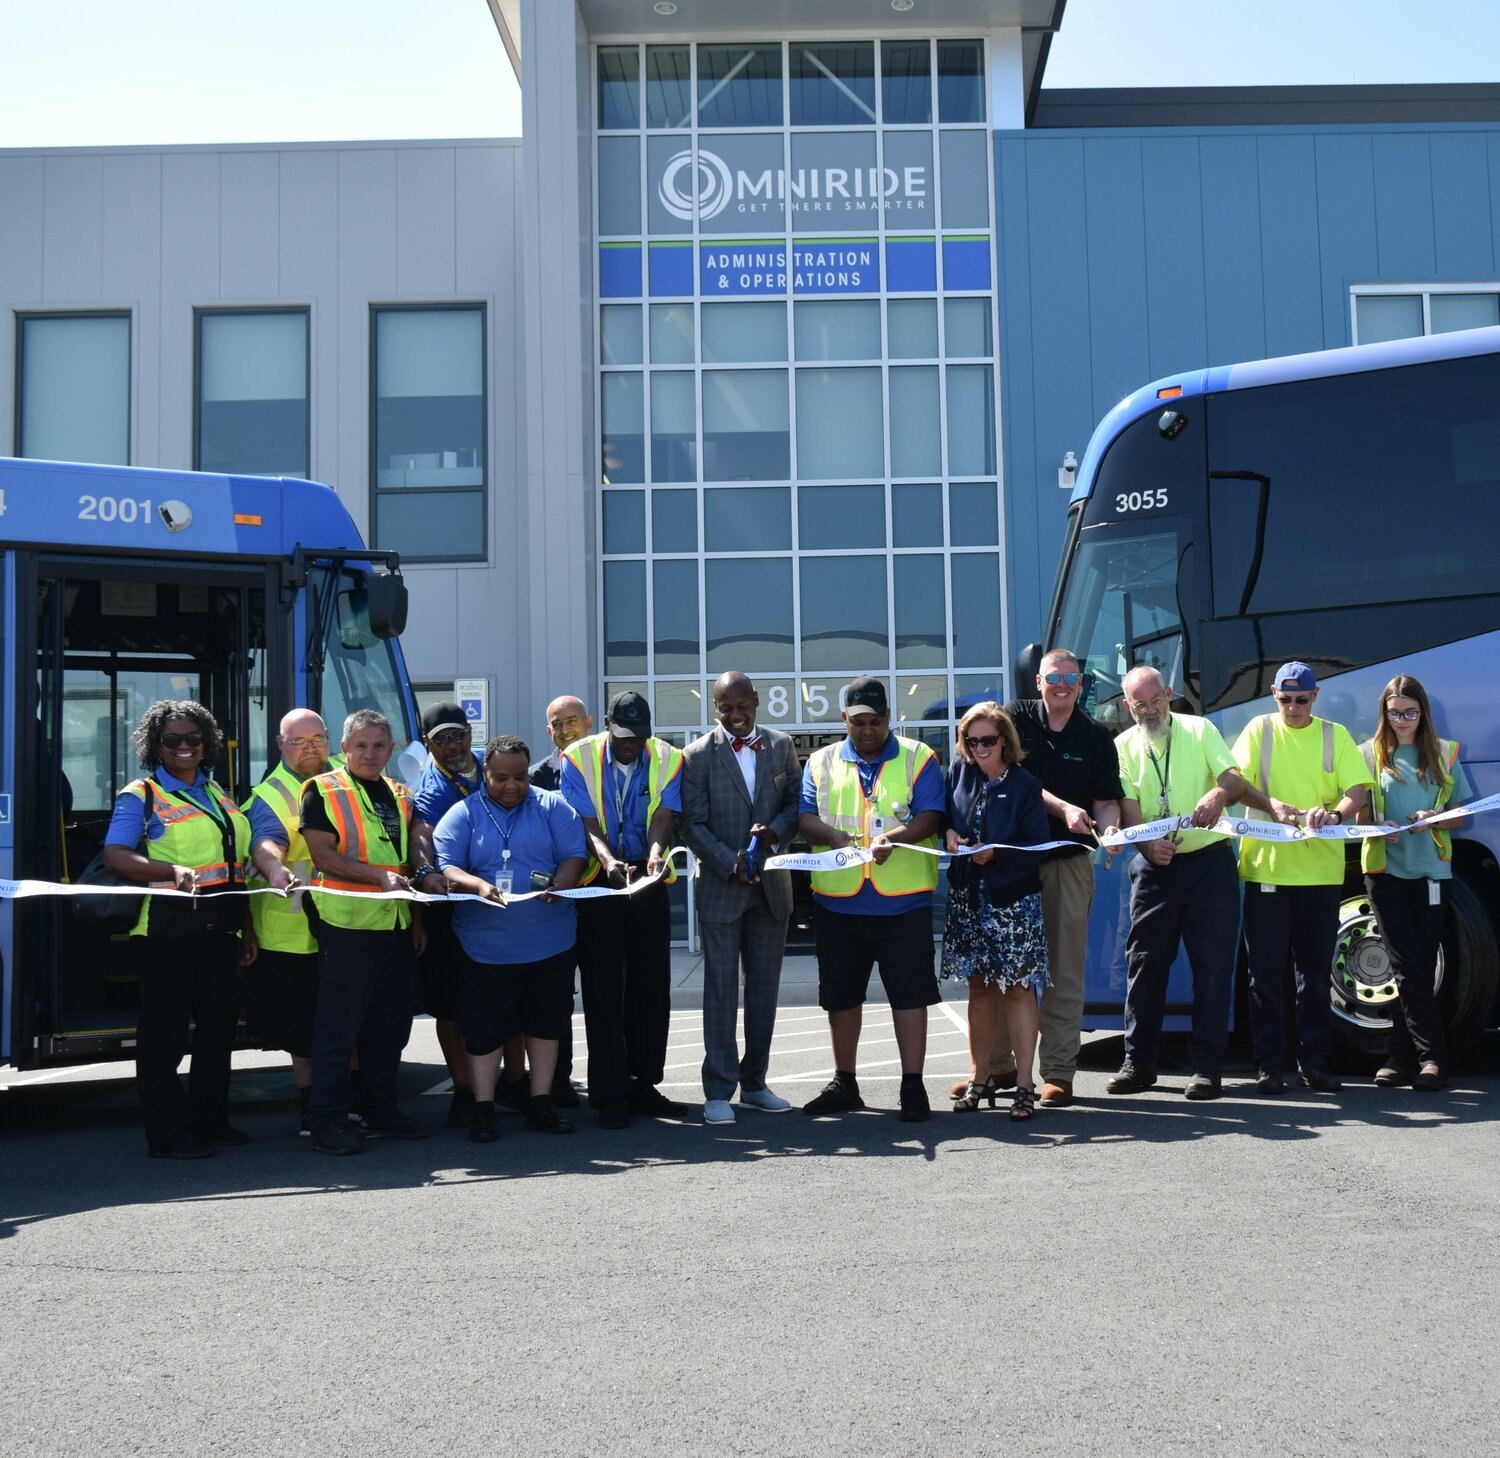 (L-R) PRTC Board Chair Victor Angry, NVTC Executive Director Kate Mattice, OmniRide Executive Director Bob Schneider, and bus operators and mechanics.